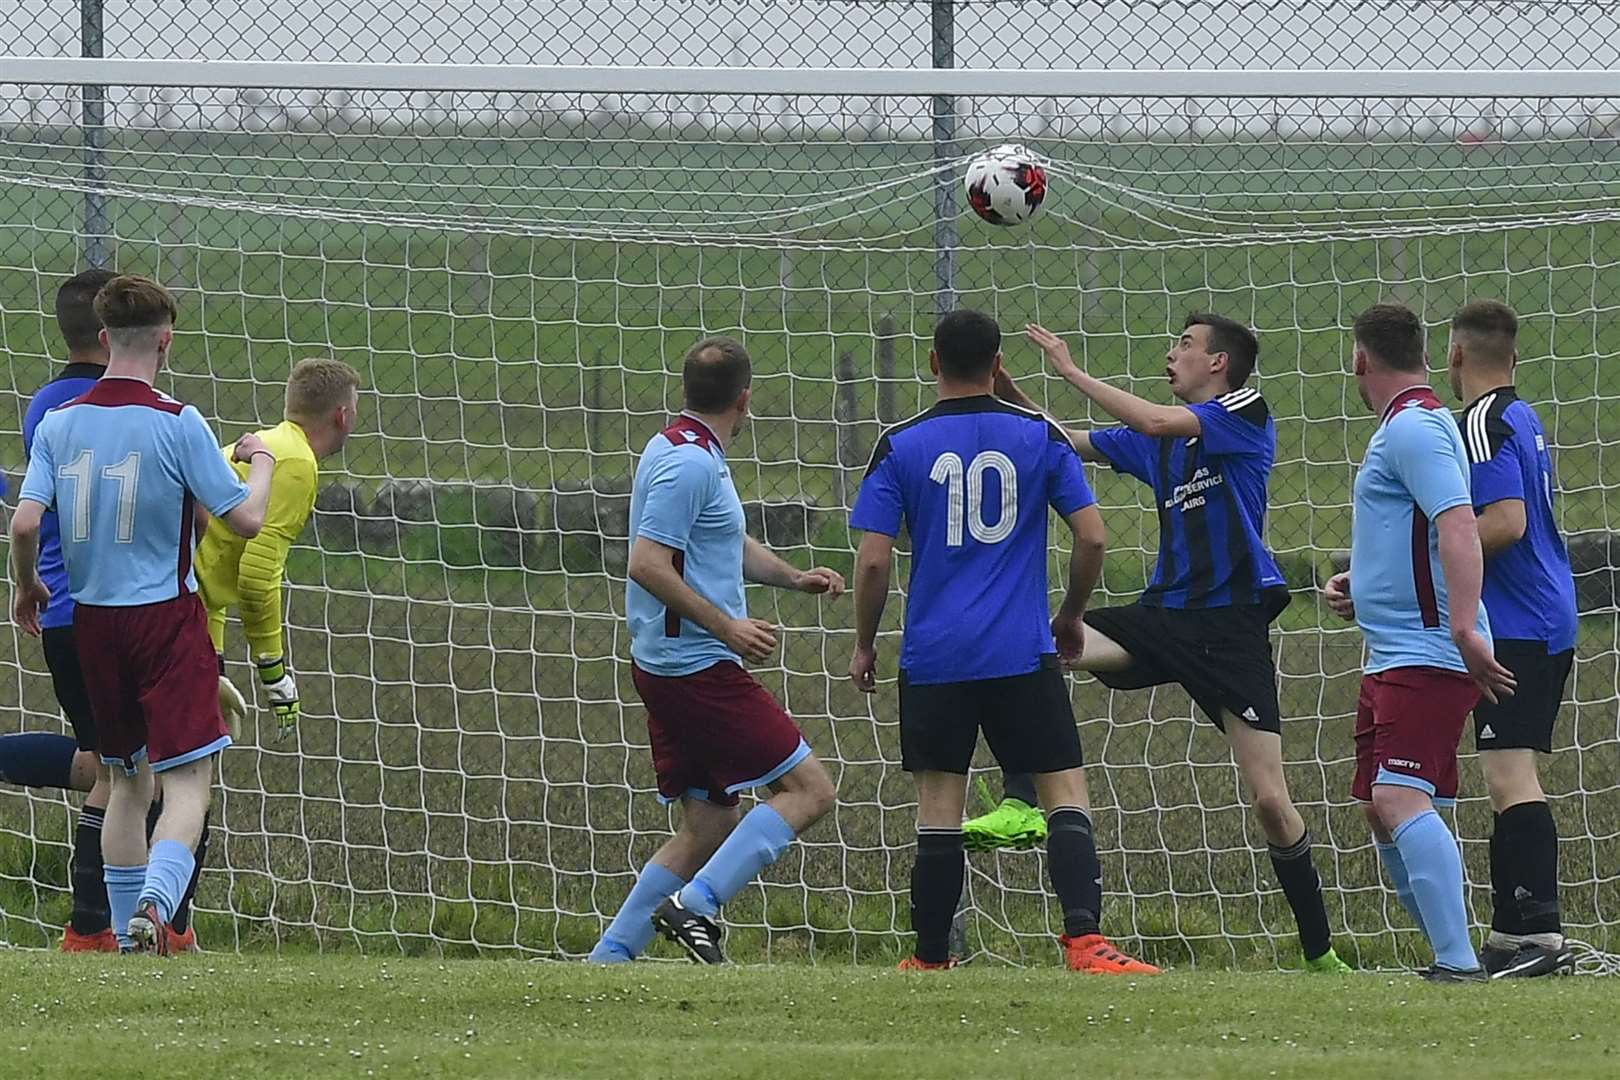 Shaun Forbes nets for Pentland in 2019’s cup win over Lairg Rovers.